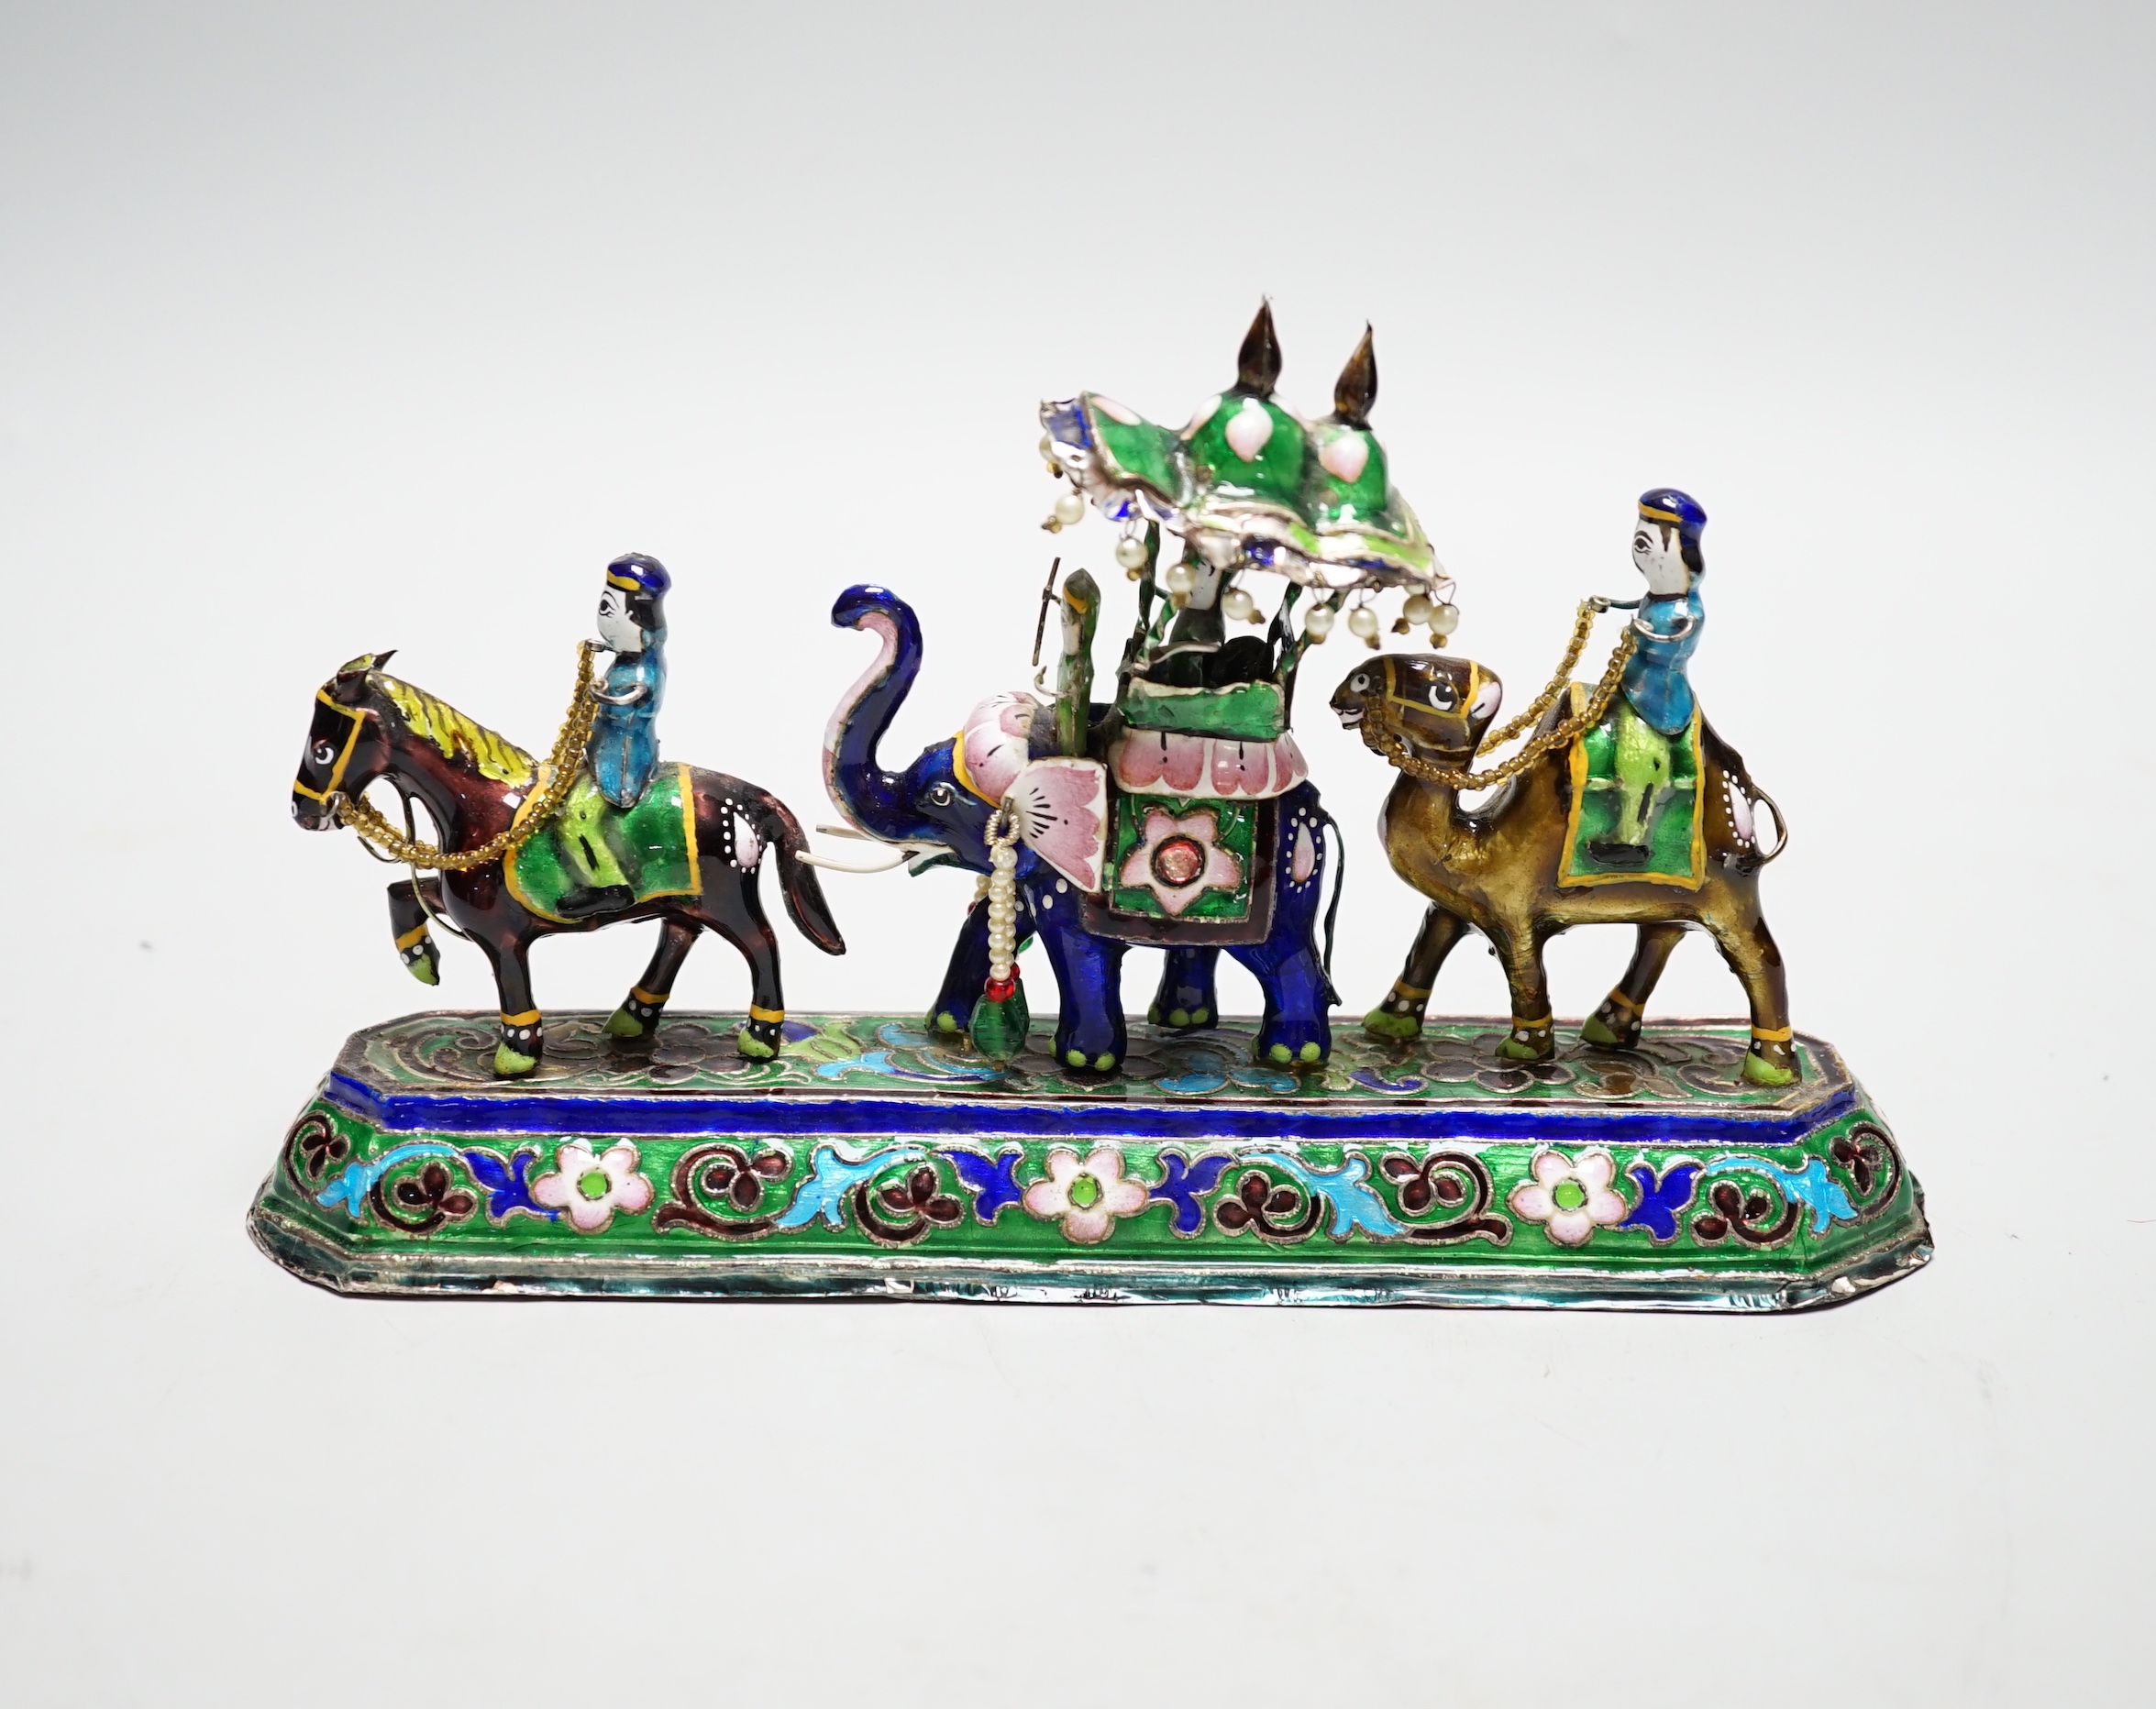 A 20th century Indian white metal and polychrome enamel figural group, with elephants and figures, stamped to base 'BHI SILVER', weighted, length 23cm.